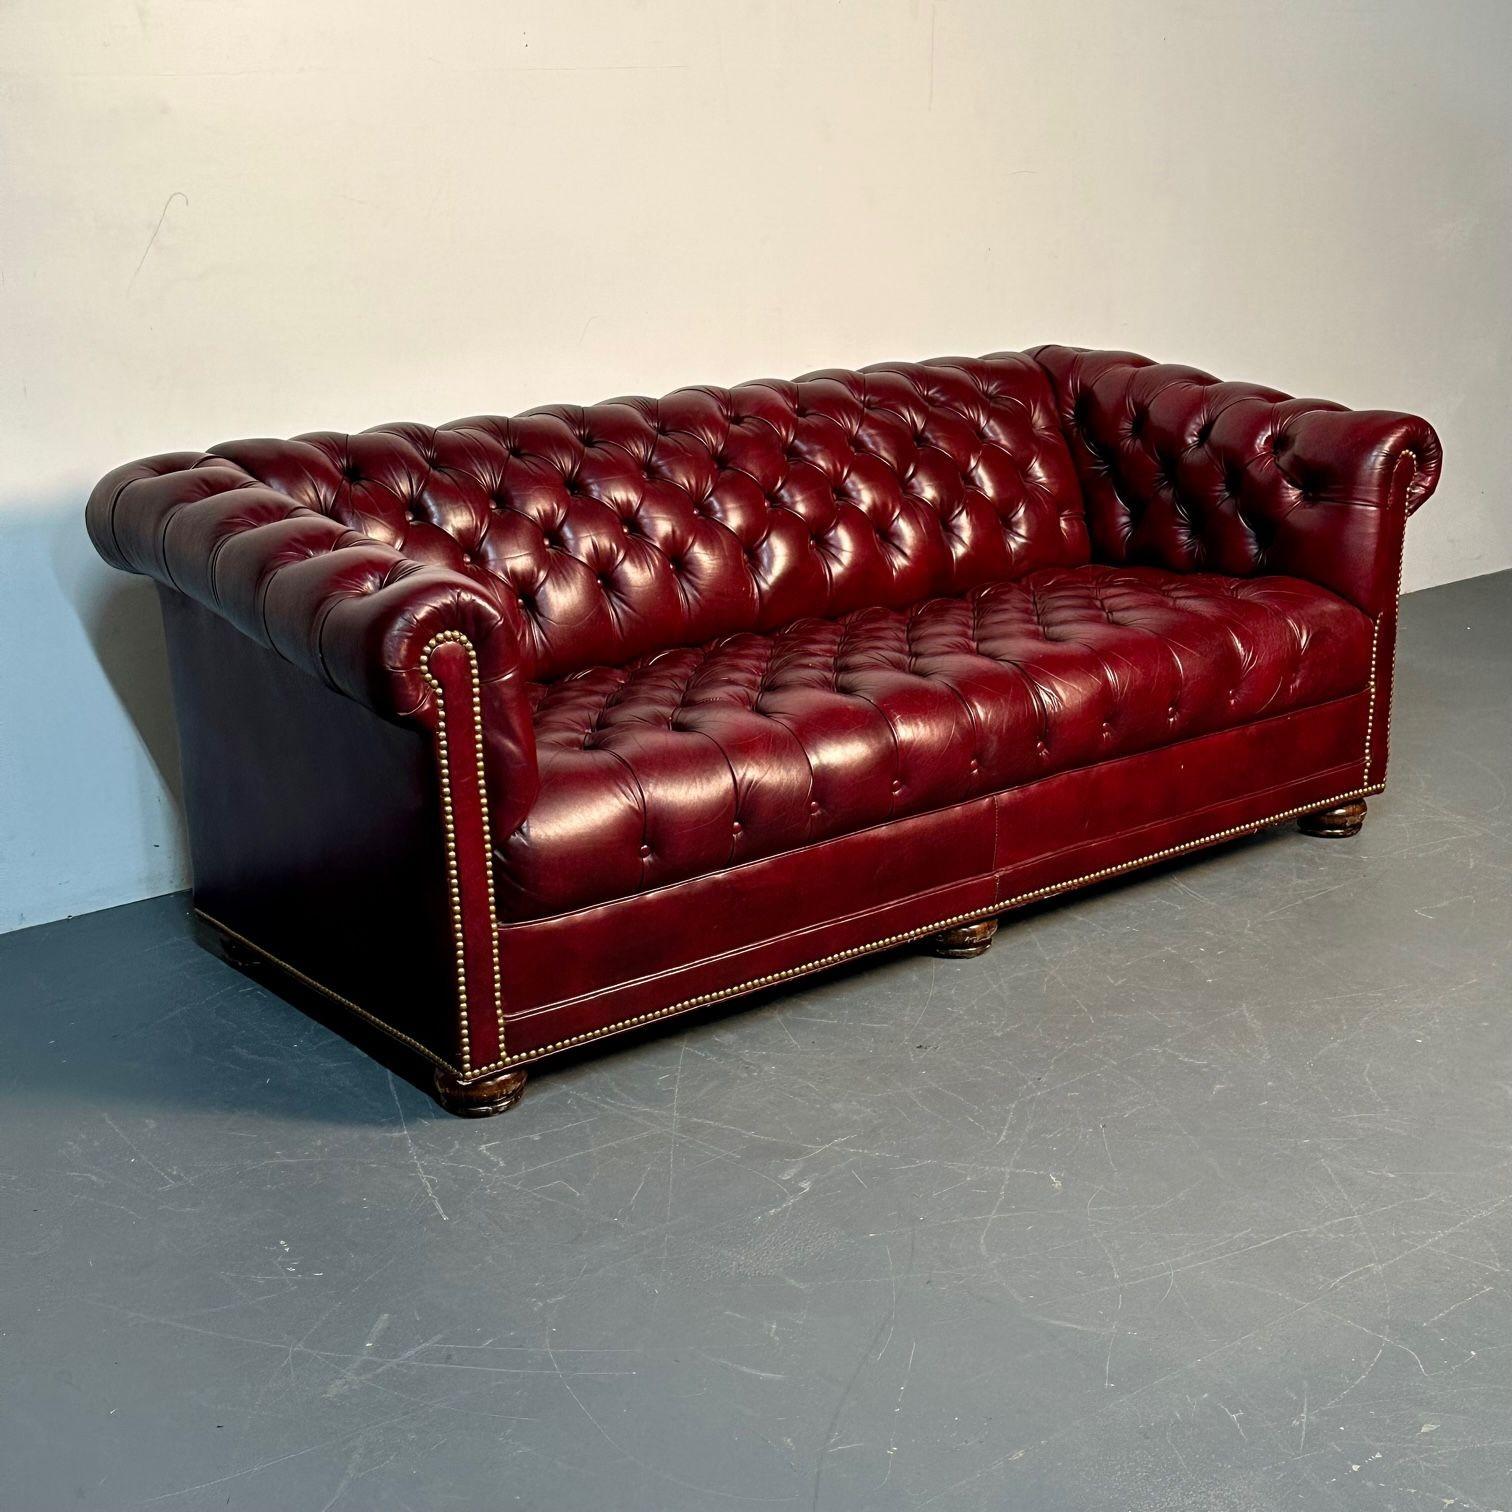 Contemporary Georgian Oxblood Red Leather Chesterfield Sofa / Settee, Tufted, Bun Feet